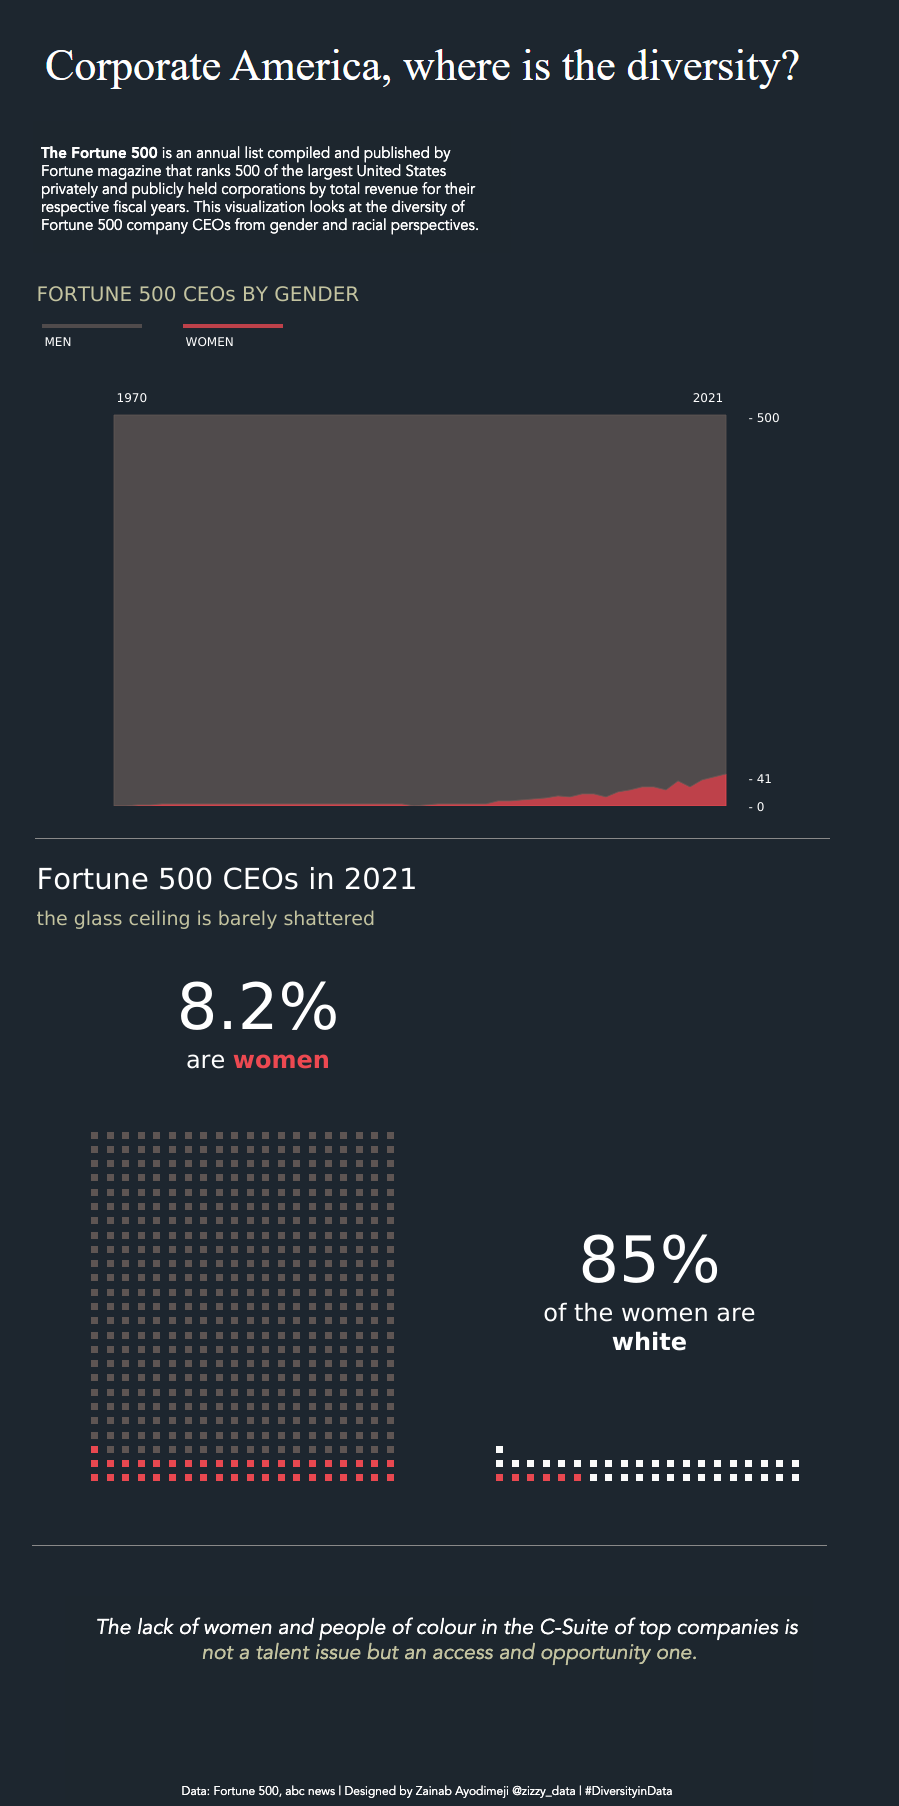 Graphic showing the breakdown of female CEOs on the Fortune 500 since 1970